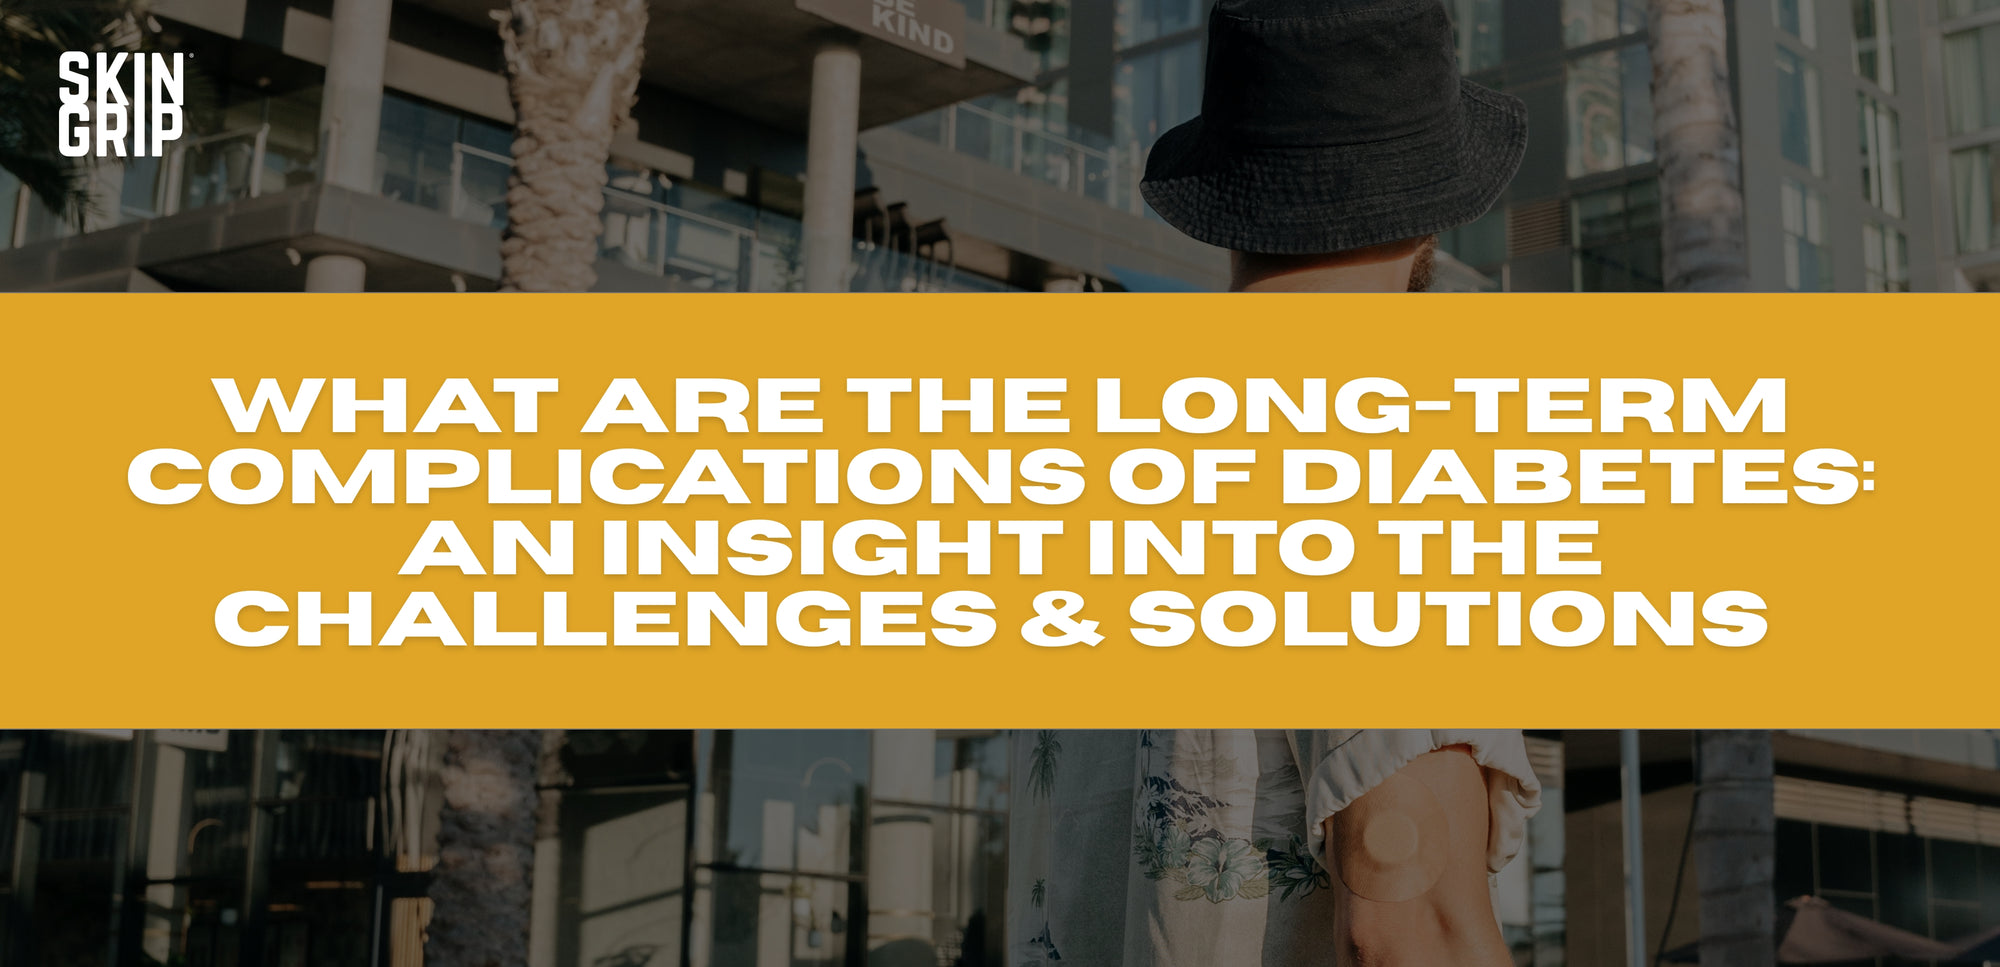 What Are the Long-Term Complications of Diabetes: An Insight Into the Challenges and Solutions